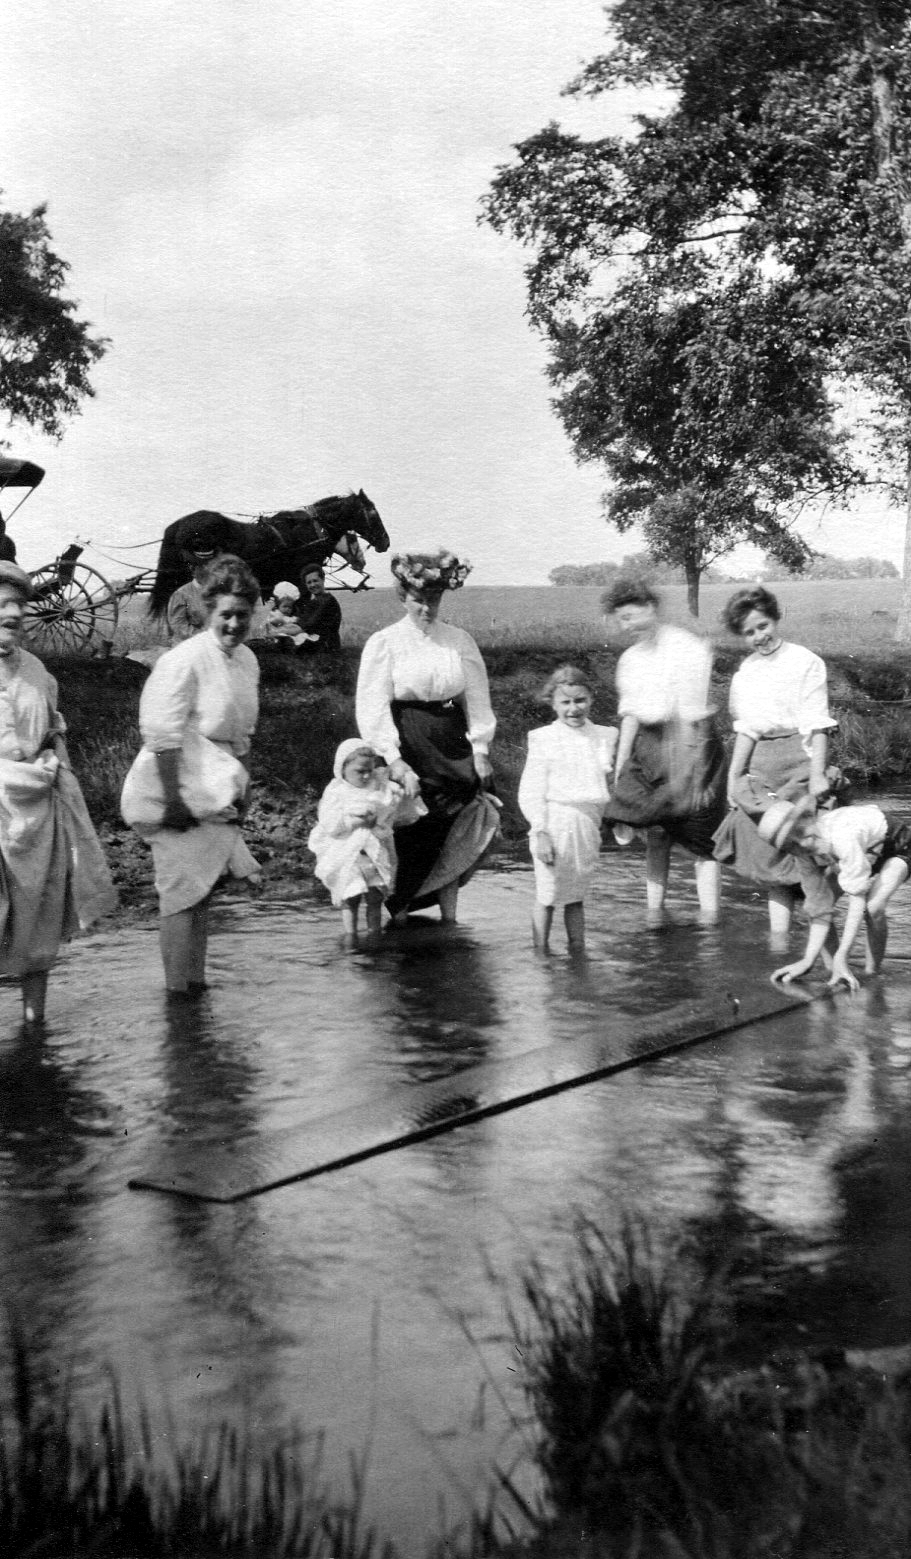 photo of Unidentified Women and Children Wading in a Stream